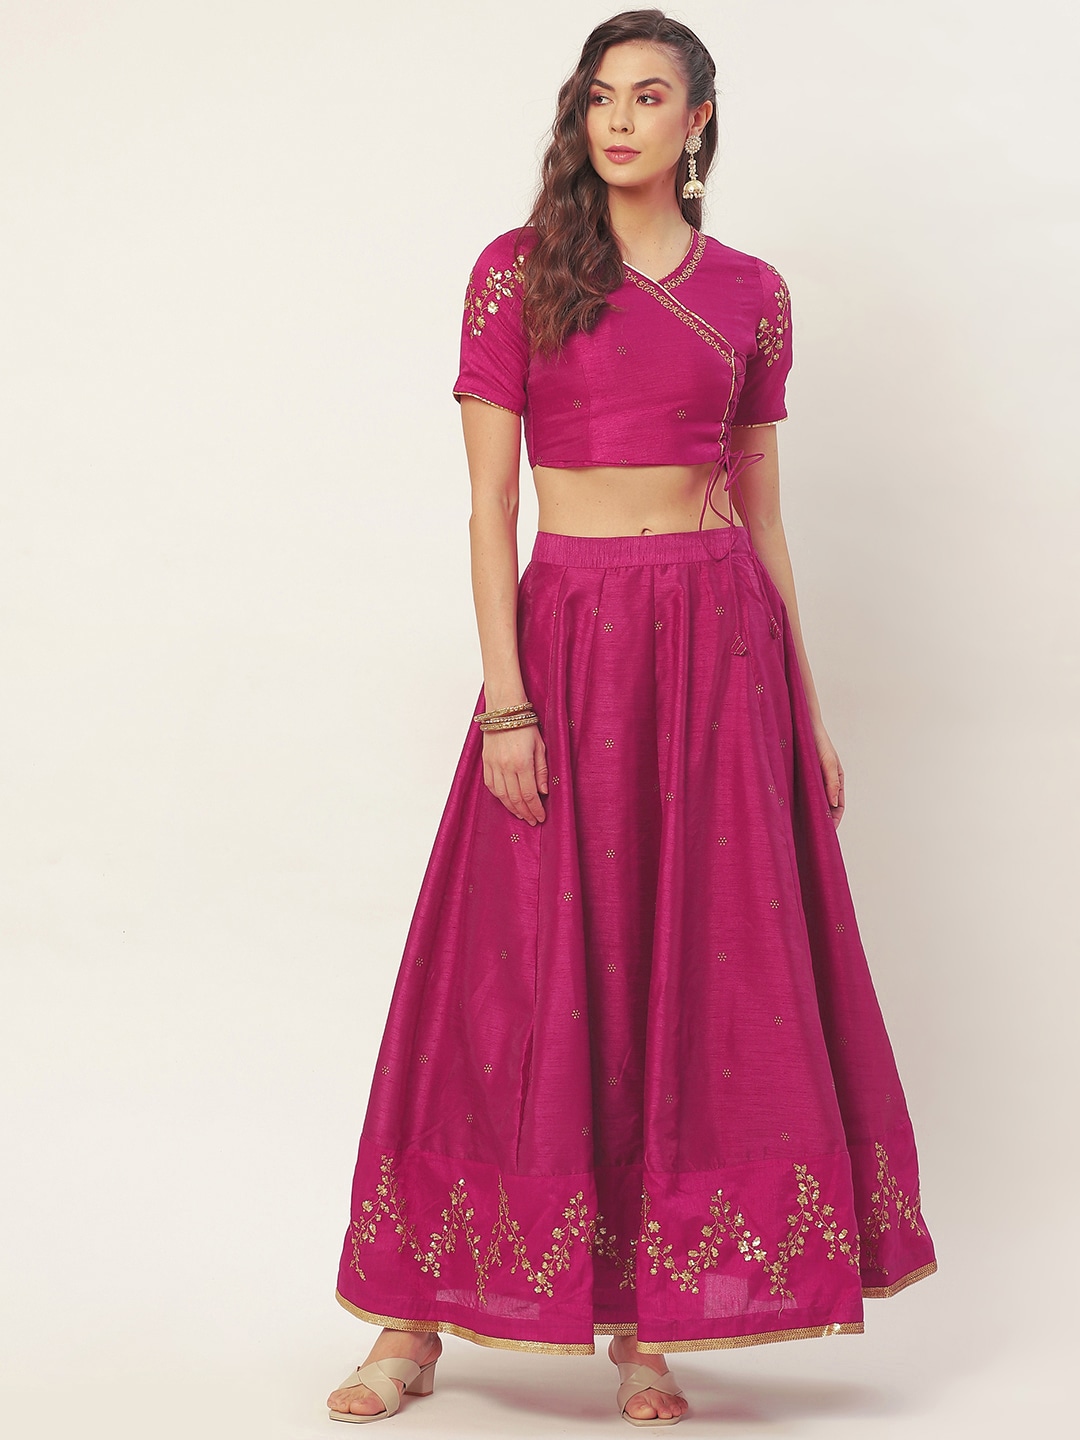 Aayna Women Pink Embellished Top with Skirt Price in India